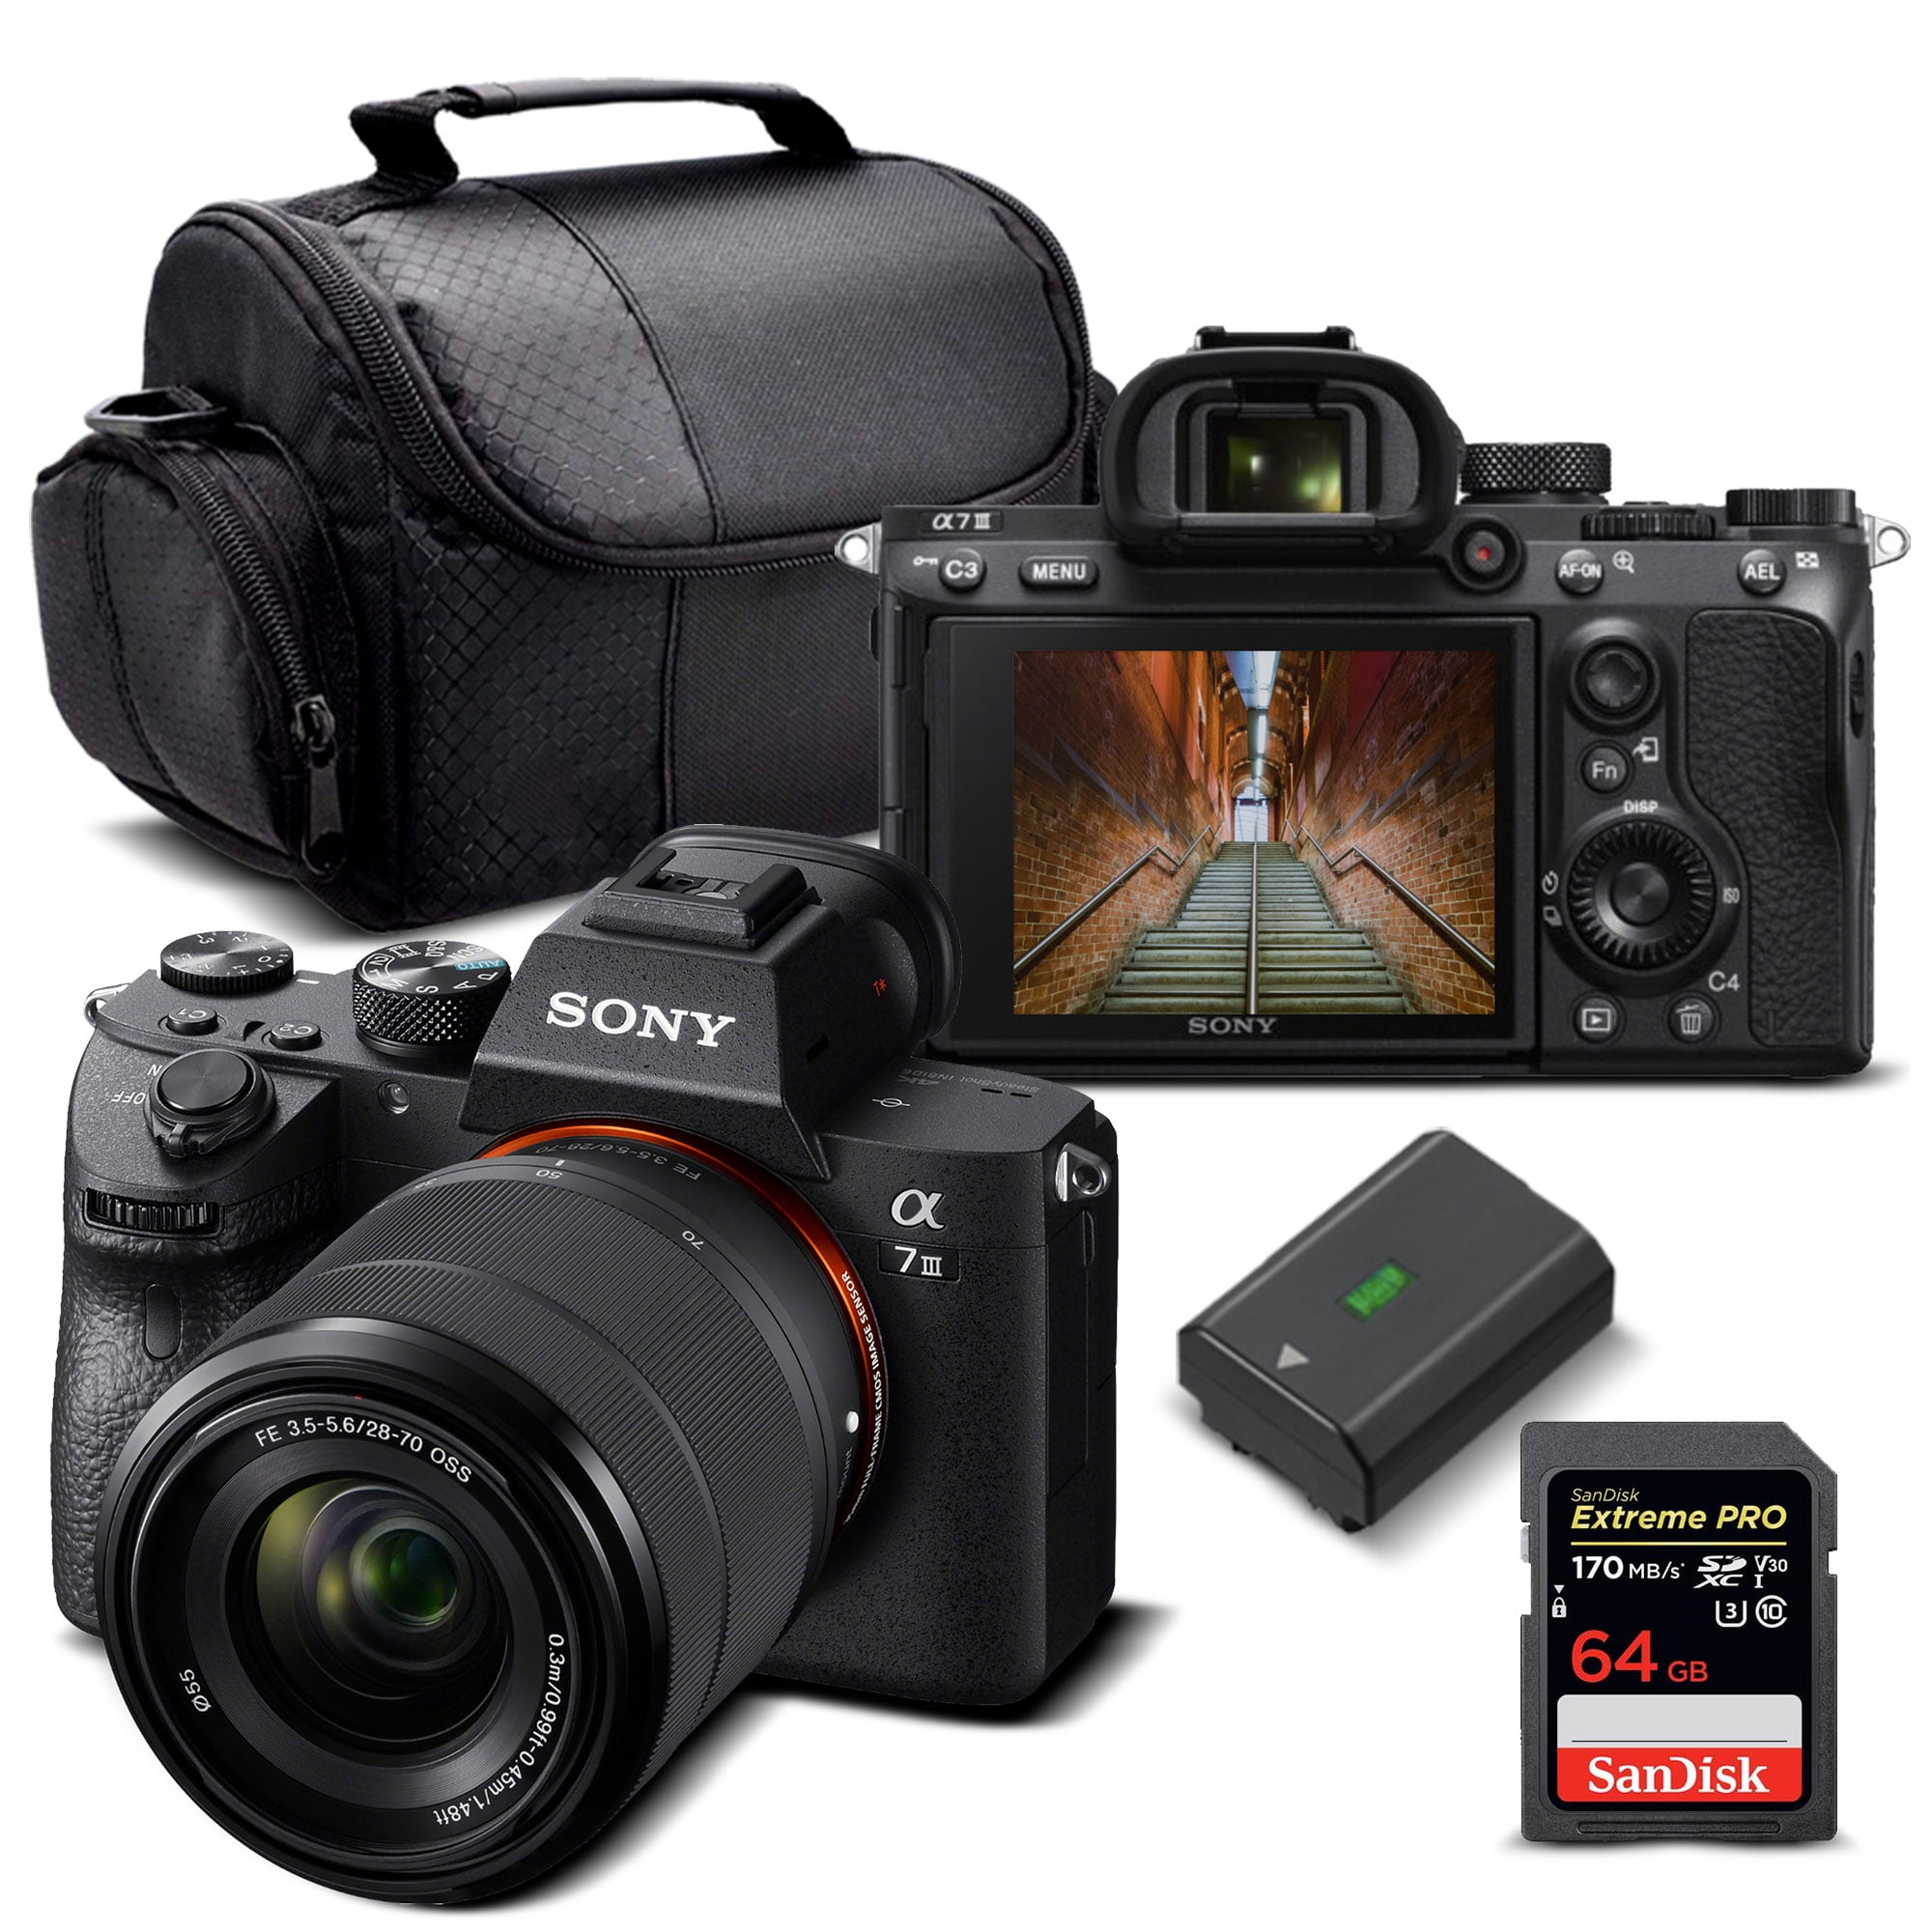 Sony Alpha a7II Mirrorless Digital Camera Bundle with 28-70mm f/3.5-5.6  Lens and 64GB SD Card (2 Items)